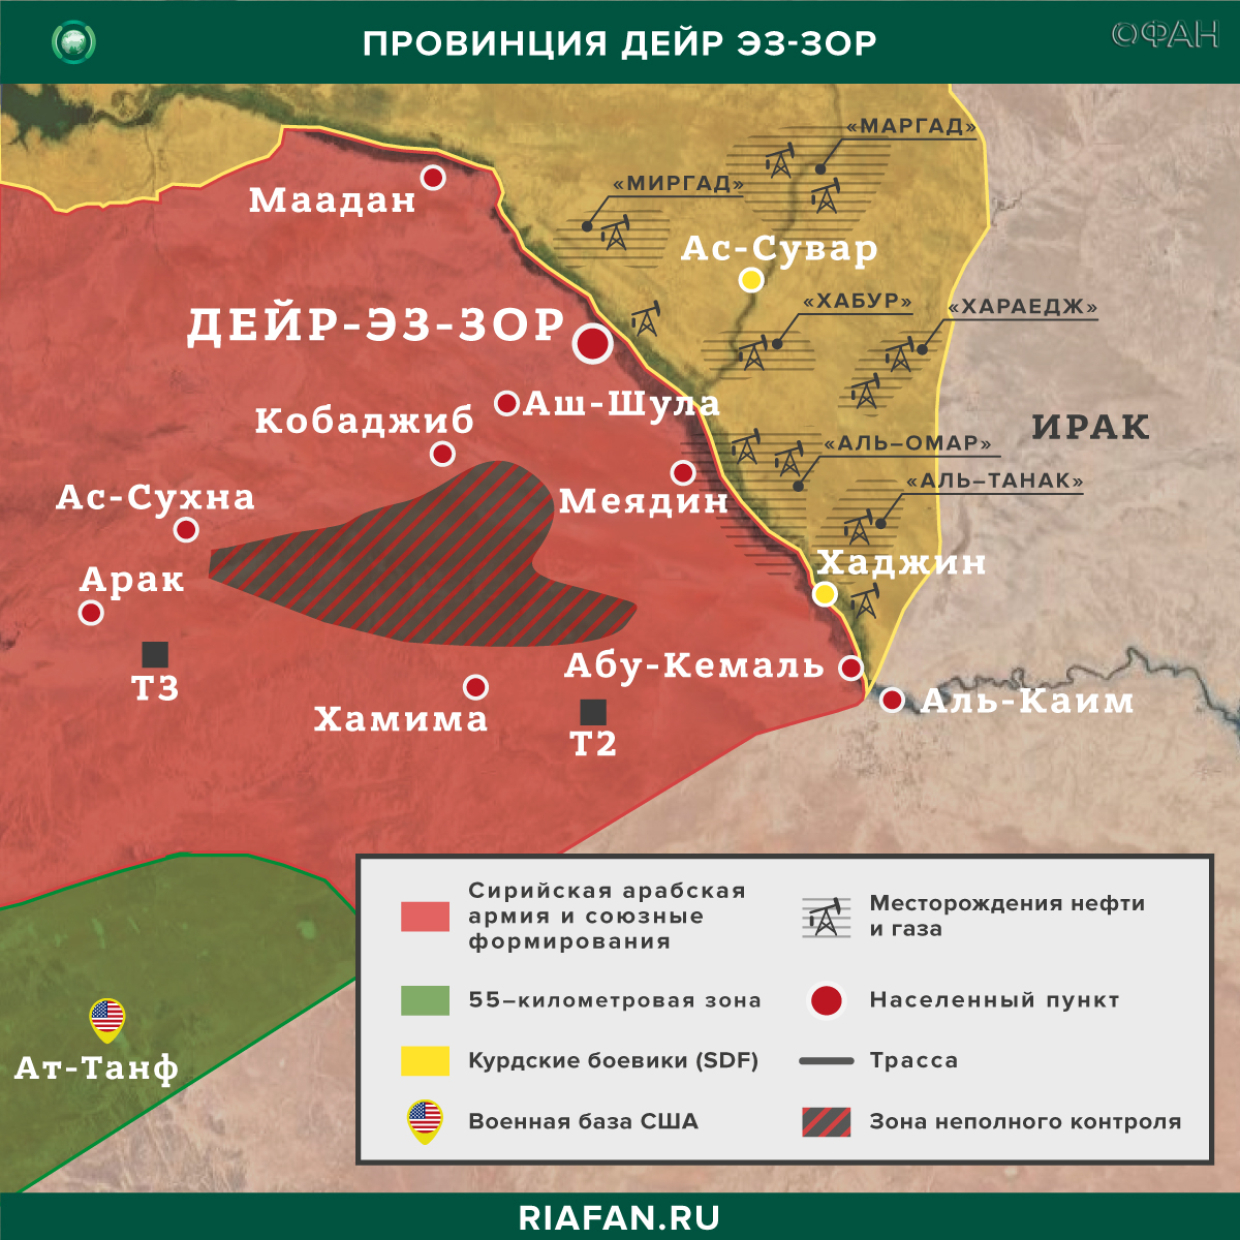 Syria the results of the day on 4 August 06.00: SAR MFA criticized the SDF-US agreement